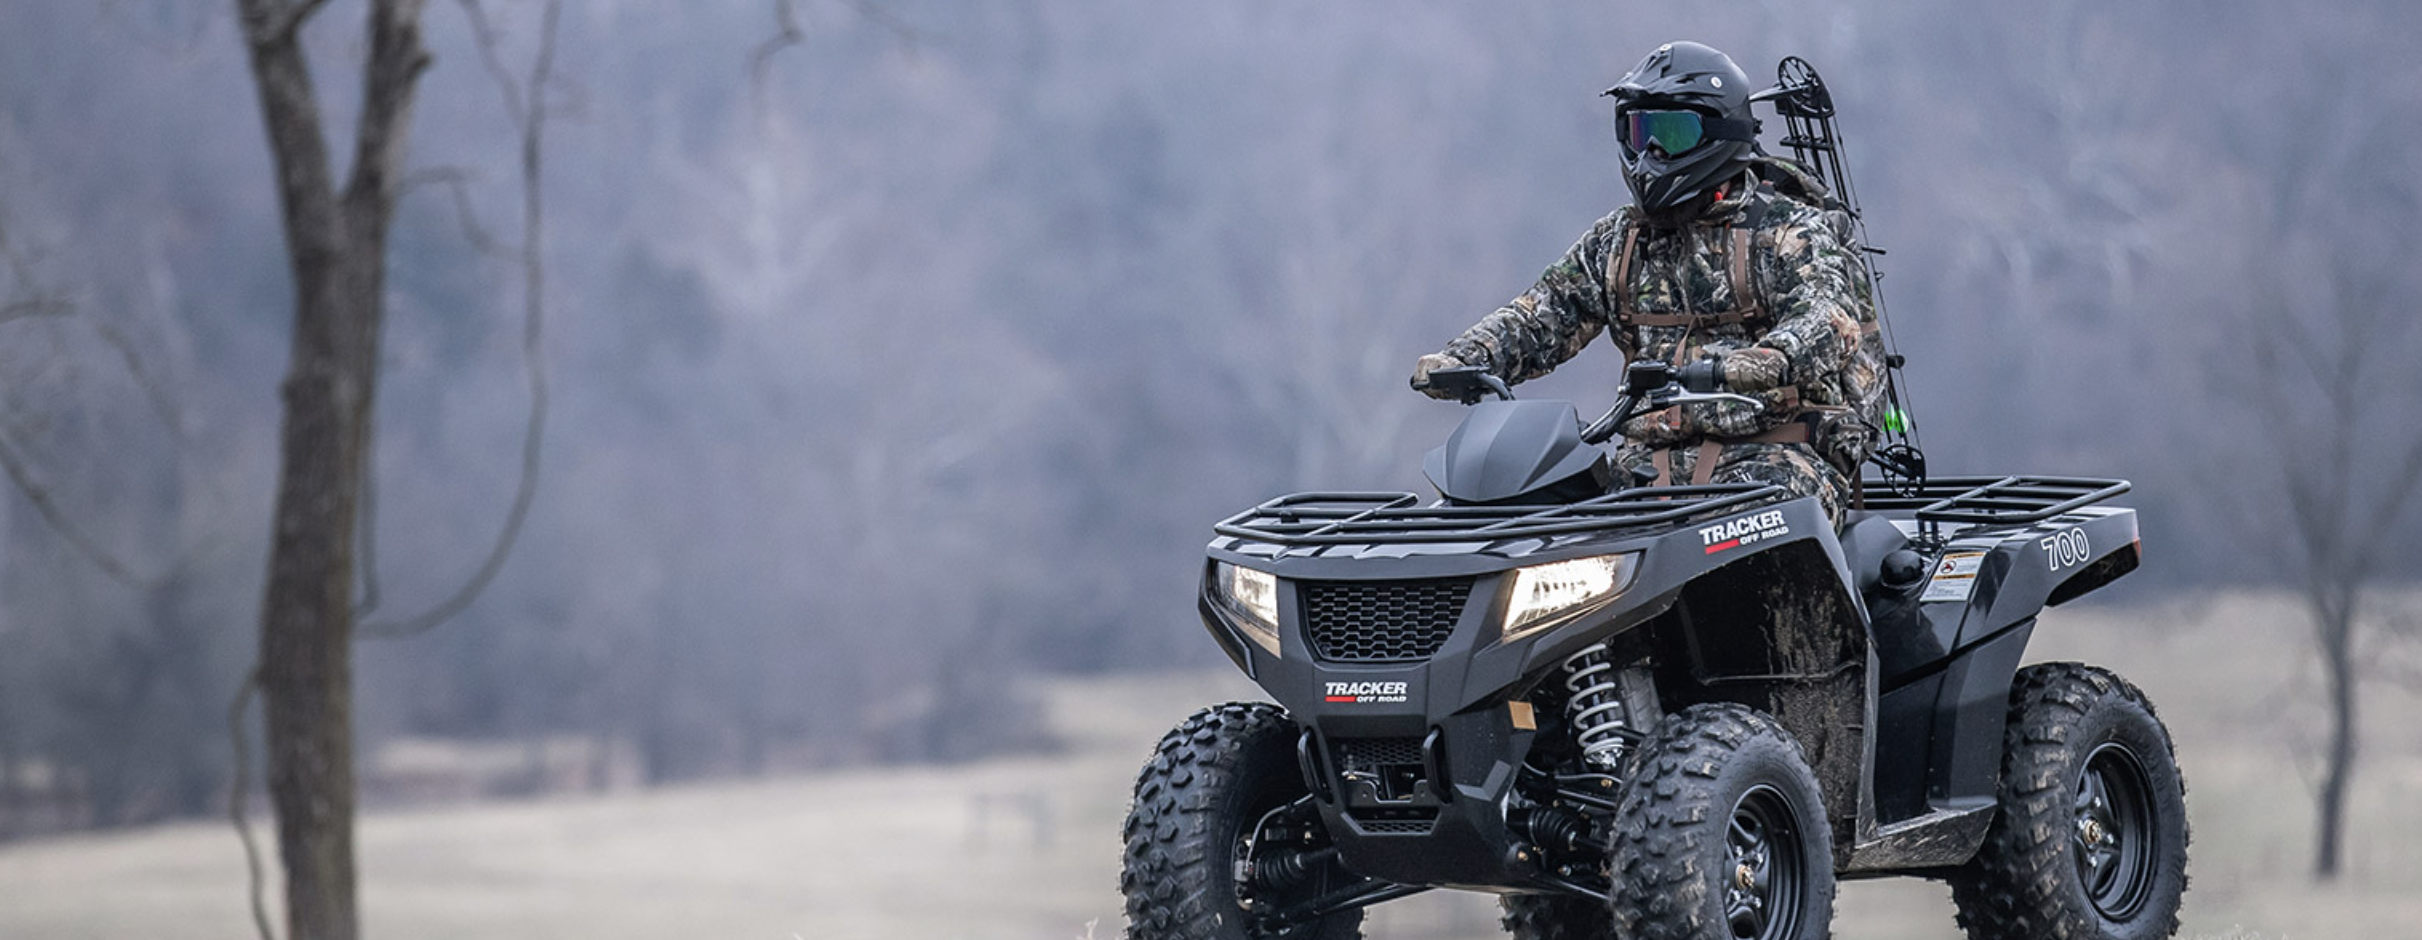 The best ATV Insurance protects you and your ATV